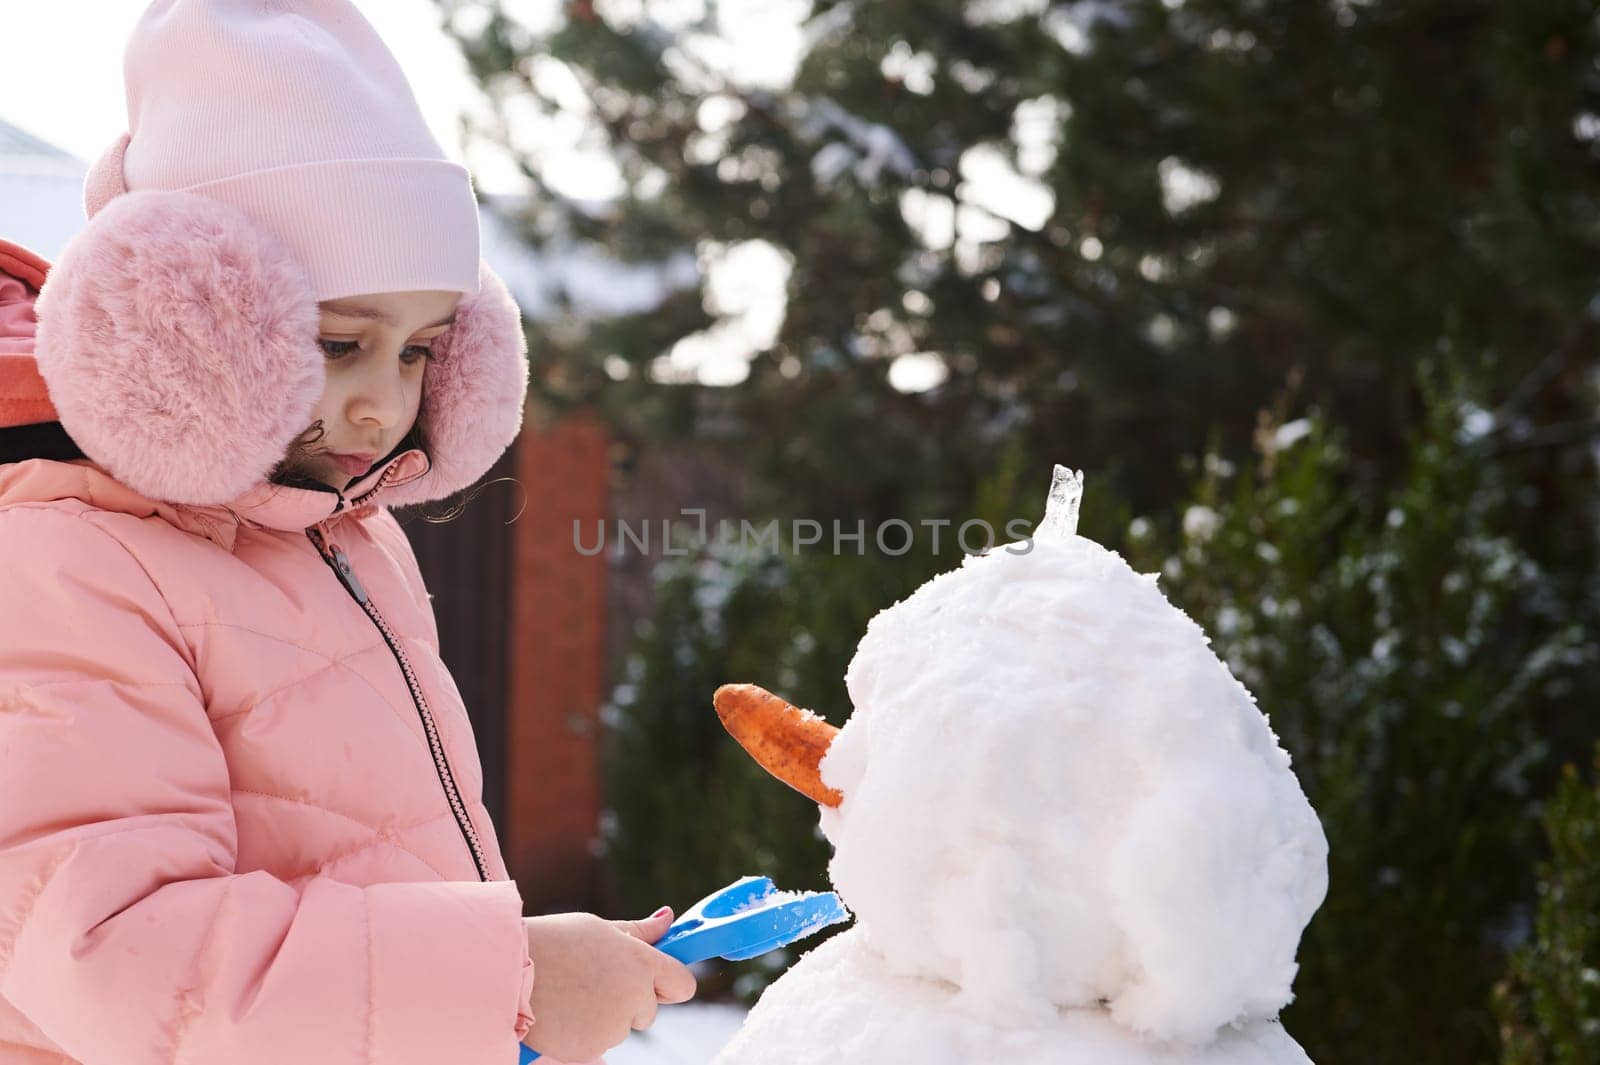 Close-up portrait lovely little child girl in pink down jacket and fluffy earmuffs, building snowman in snowy backyard by artgf